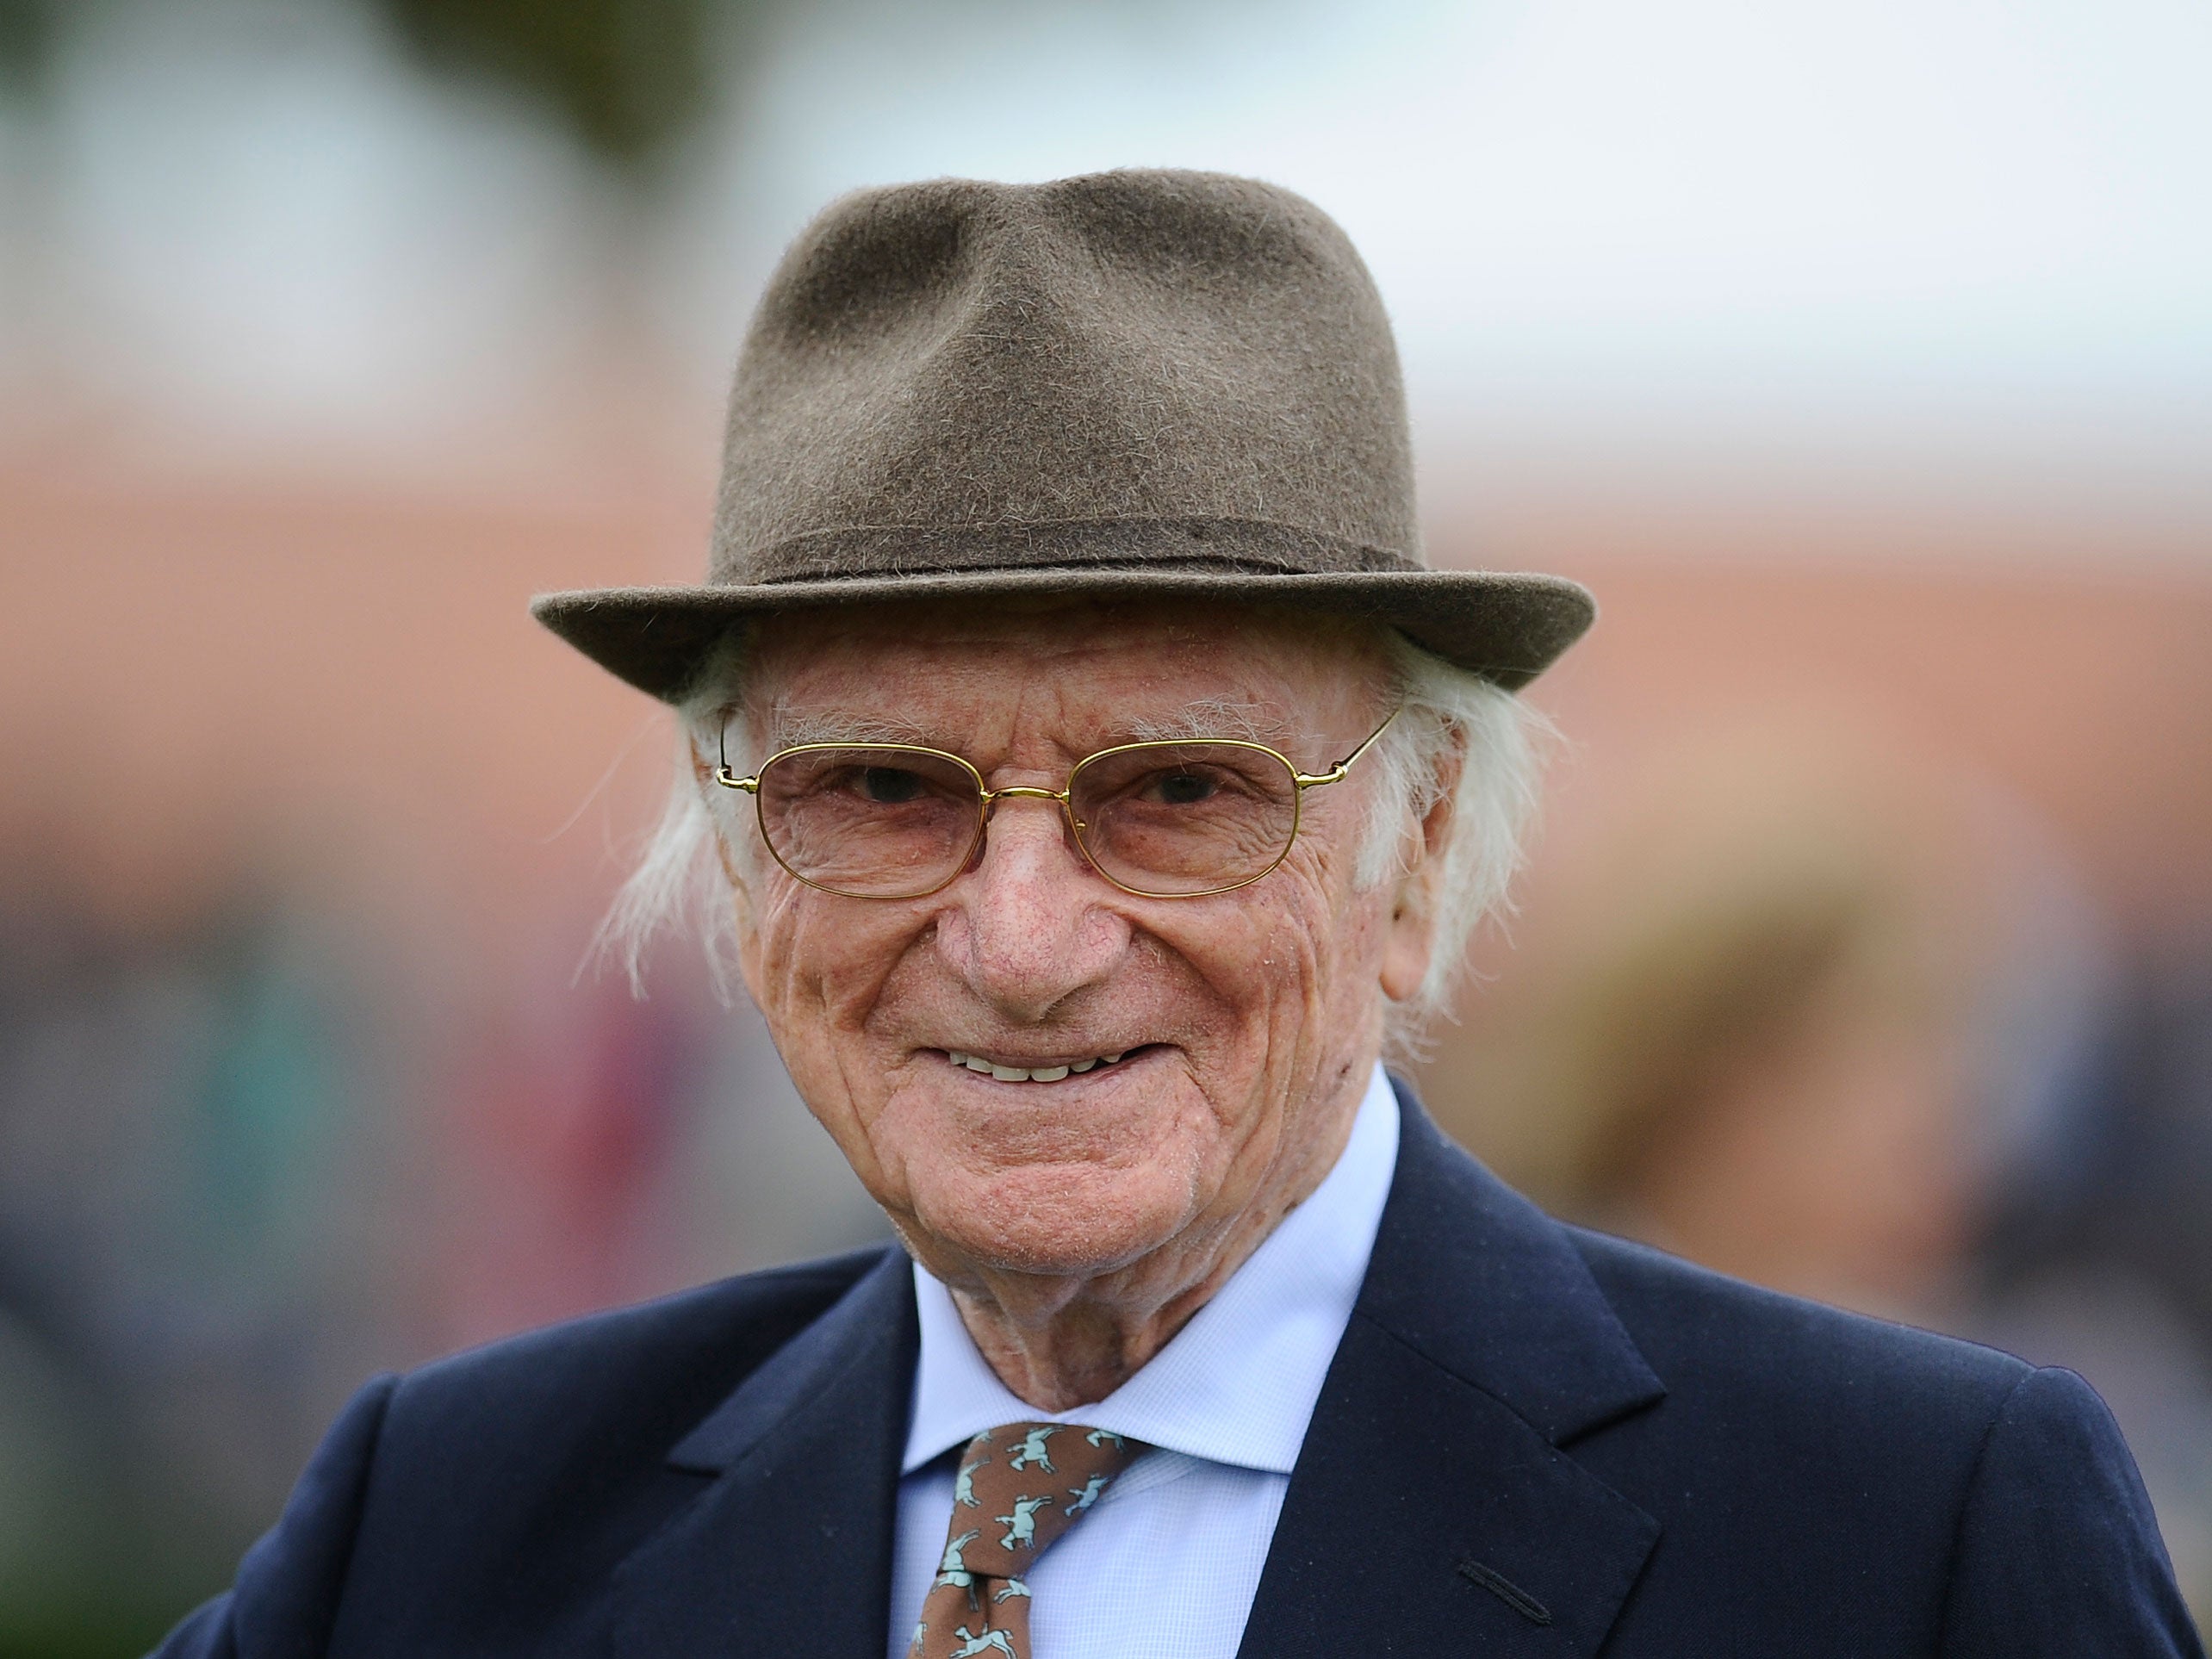 Sir Peter O'Sullevan at Newmarket racecourse in 2011